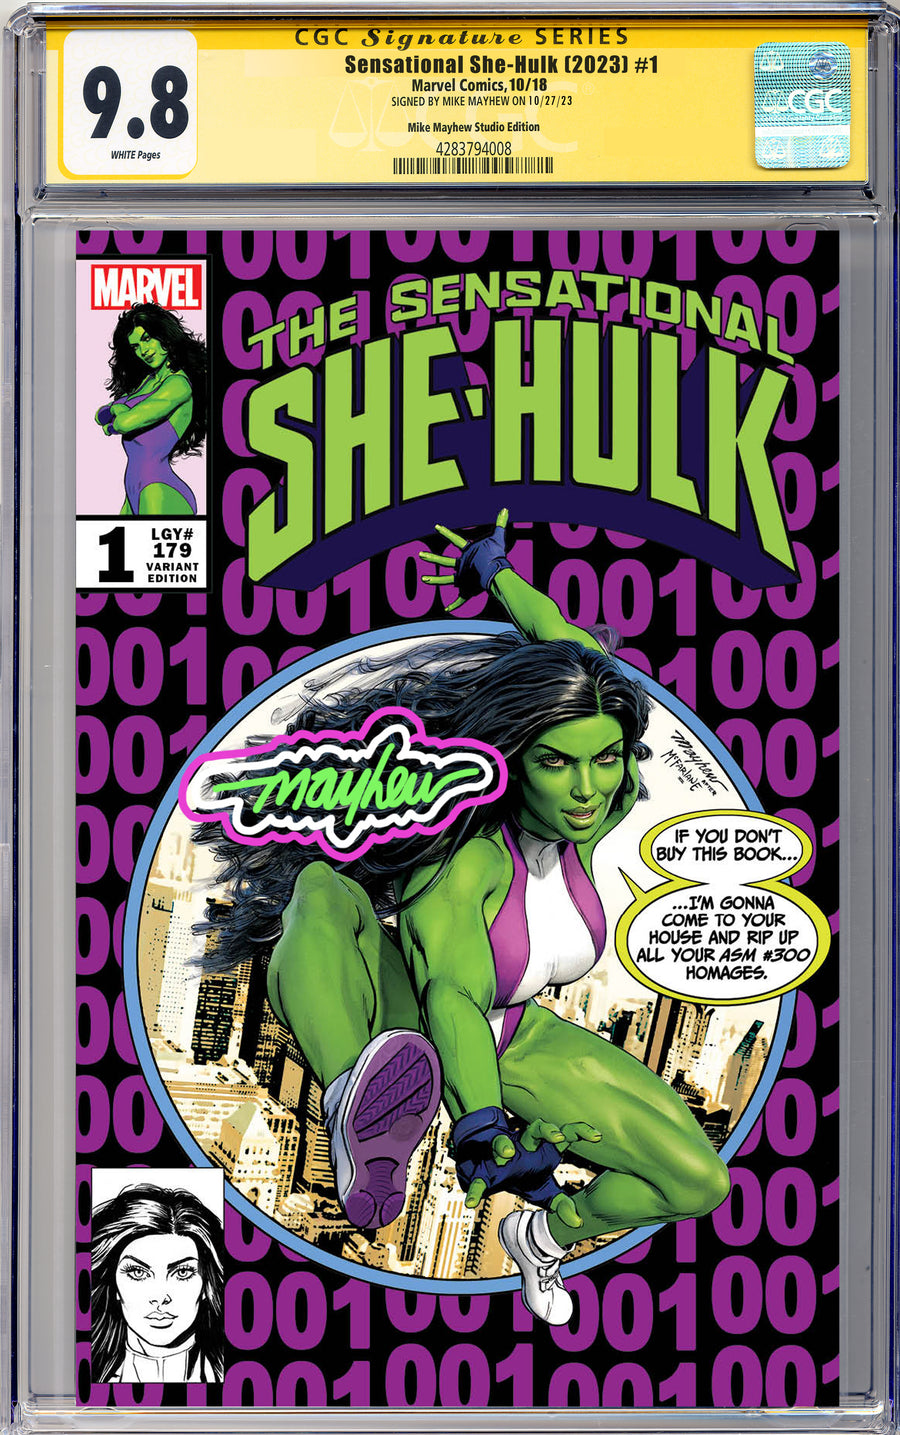 THE SENSATIONAL SHE-HULK #1 Mike Mayhew Studio Variant Cover A Trade Dress She-Hulk Glow Sig CGC Yellow Label 9.6 and Above Graded Slab